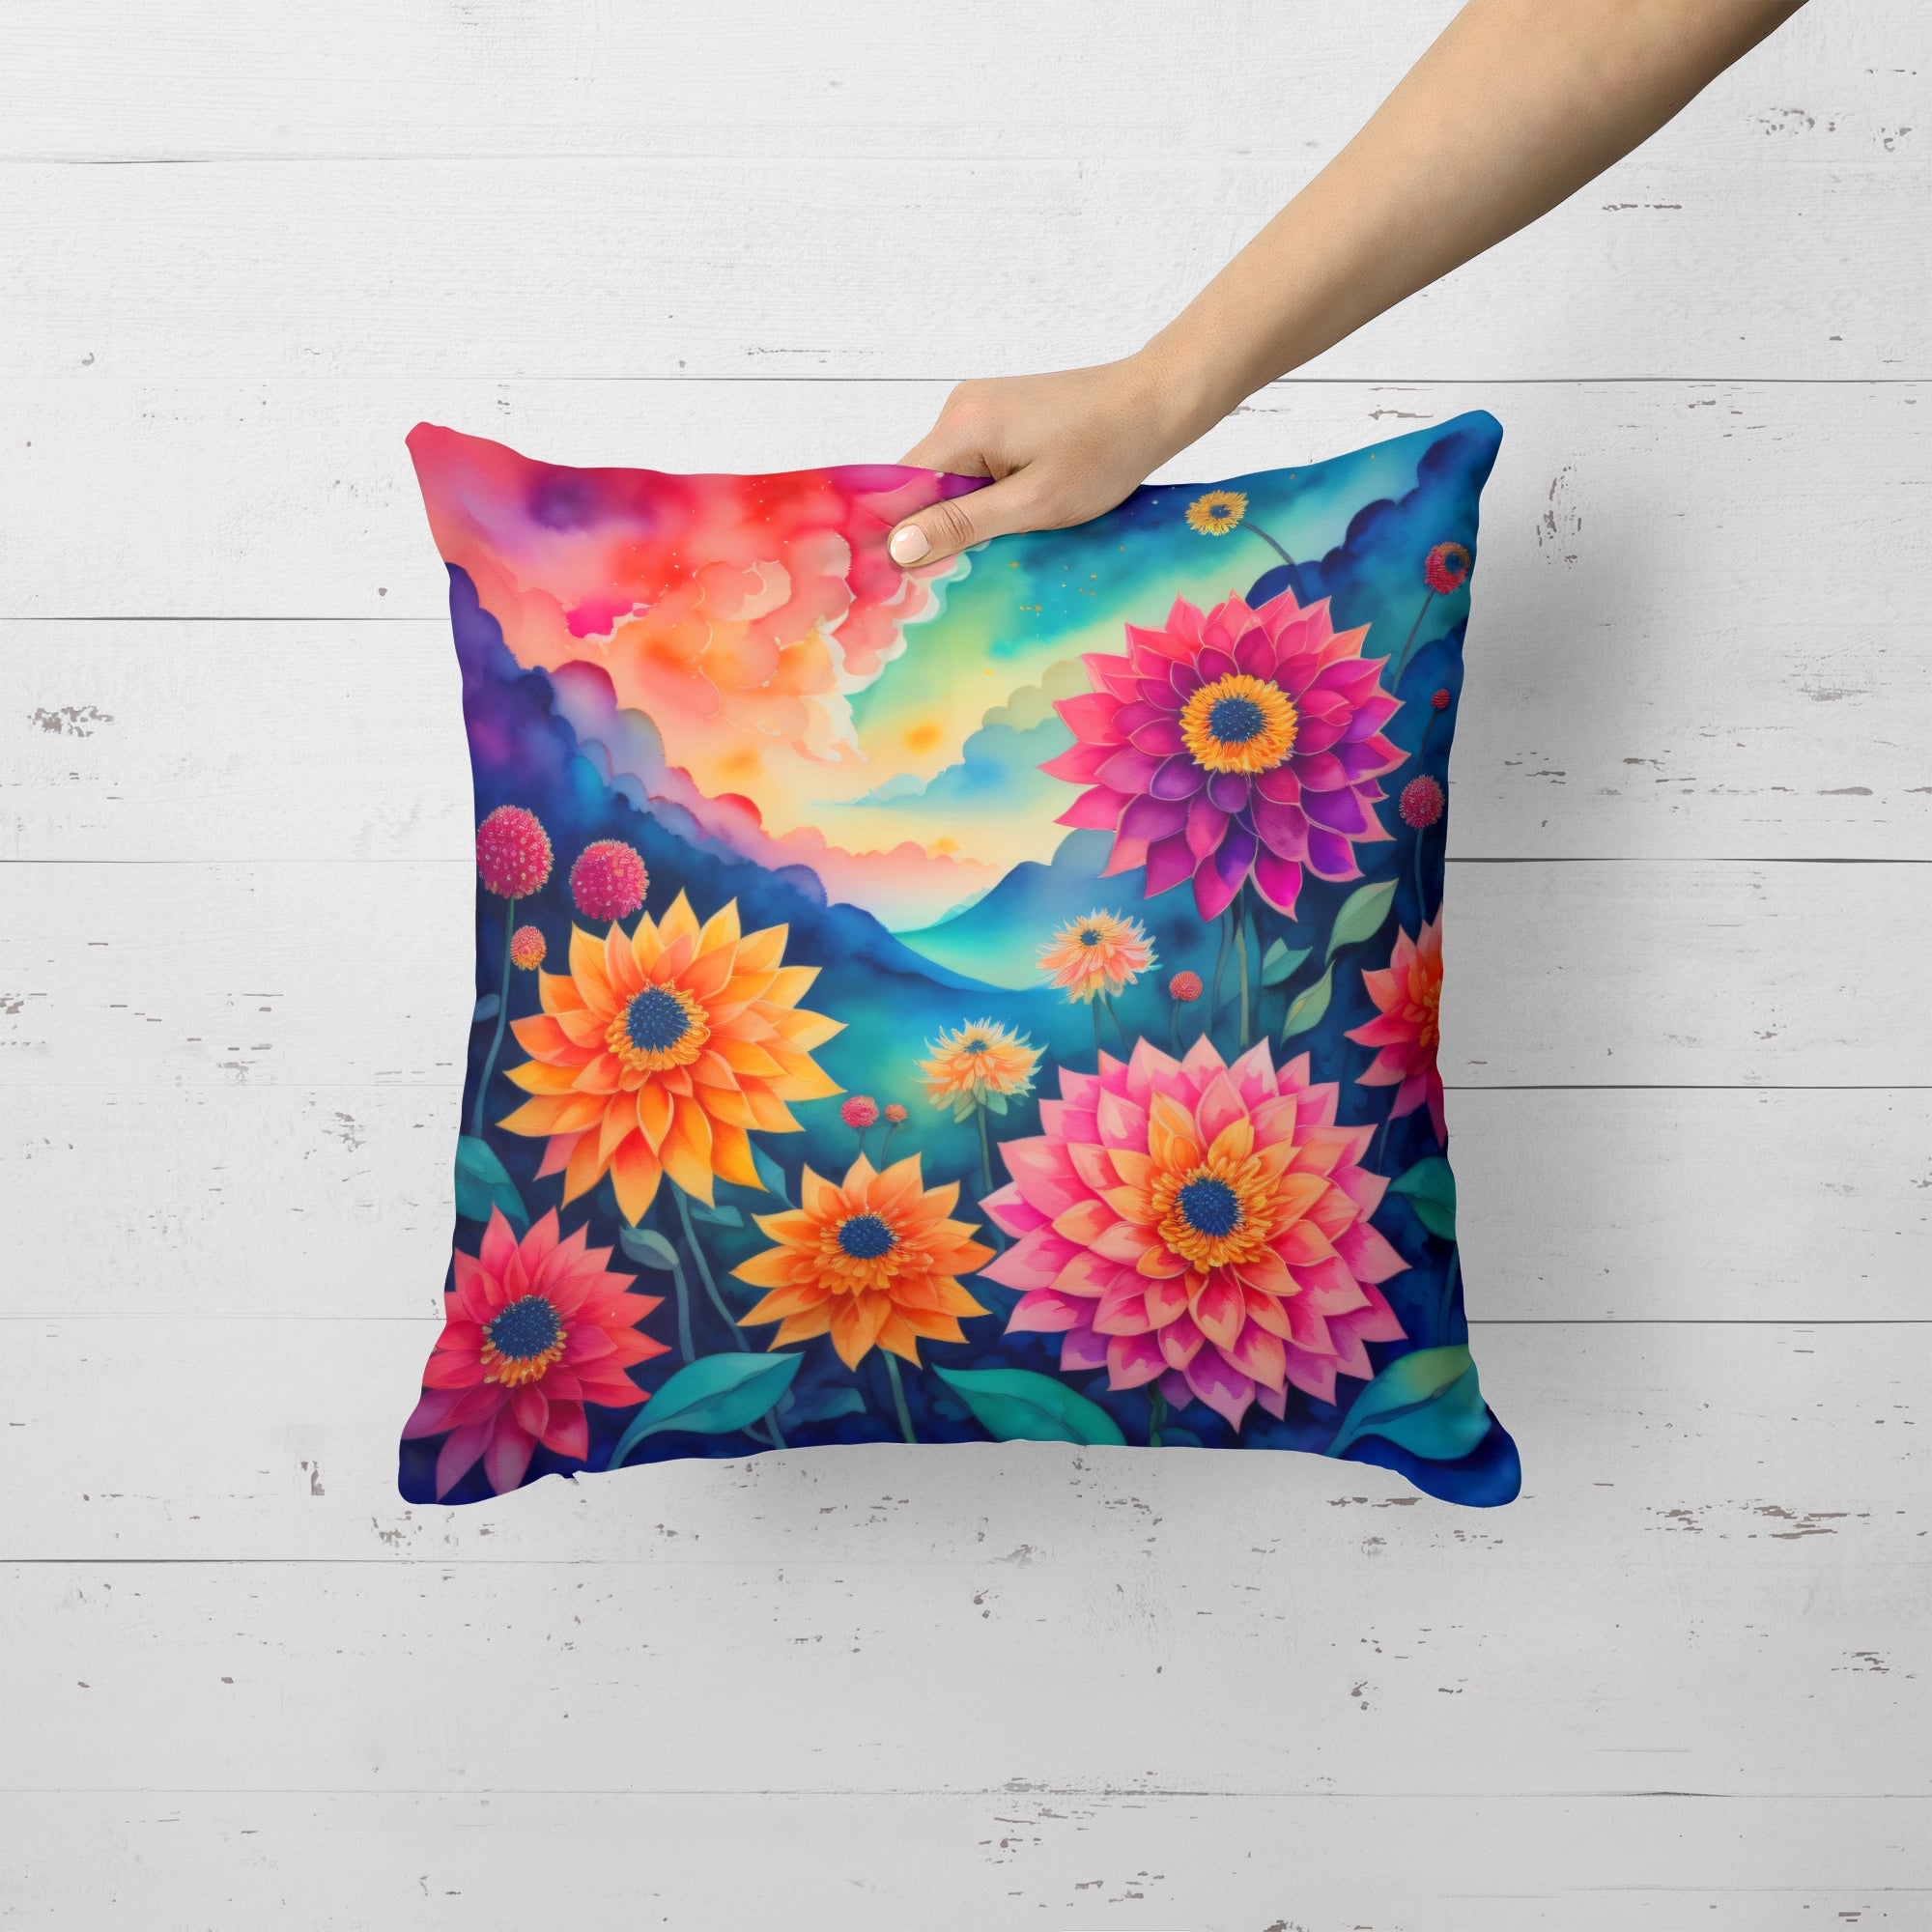 Buy this Colorful Dahlias Fabric Decorative Pillow